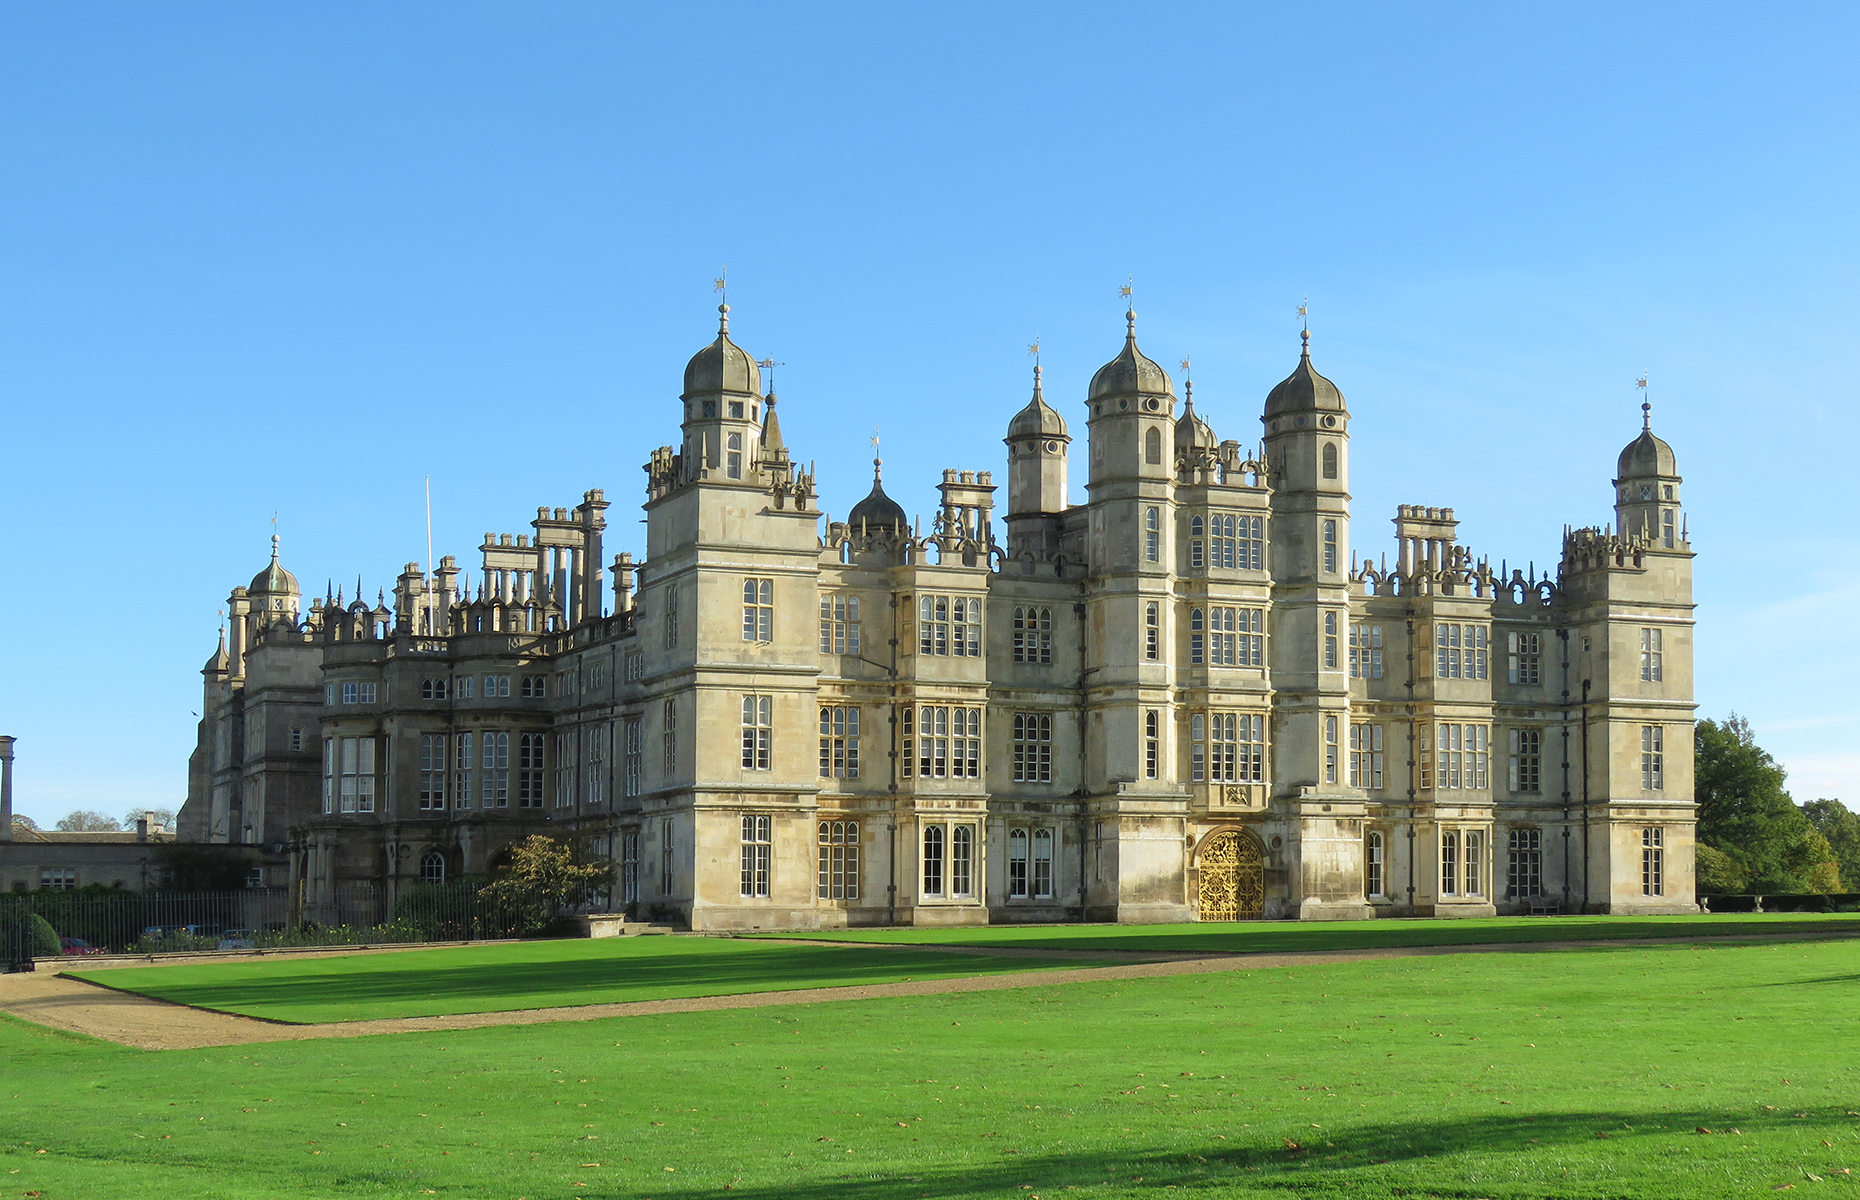 <p>In an ironic twist of fate, Elizabeth never managed to visit the completed Burghley House. According to <a href="https://www.britain-magazine.com/news/meet-queen-elizabeth-i-at-burghley-hallsort-of/">some reports</a>, her one planned visit was called off at the last minute because William Cecil’s daughter had smallpox, <a href="https://theviewfromchelsea.com/2021/08/24/burghley-house-and-stamford-short-break/#:~:text=Elizabeth%20I%20rewarded%20William%20Burghley,Chief%20Minister%20to%20his%20titles.">other records</a> say it had spread to the staff too.</p>  <p>Nevertheless, Cecil was still a valued member of The Queen's court, <a href="https://www.history.com/news/queen-elizabeth-spy-network-england">he was known as her 'spy-master'</a> keeping an eye on potential trouble-makers. He died in 1598, having never hosted Elizabeth at Burghley House. However, even if Elizabeth did not make it inside, we can still take a tour...</p>